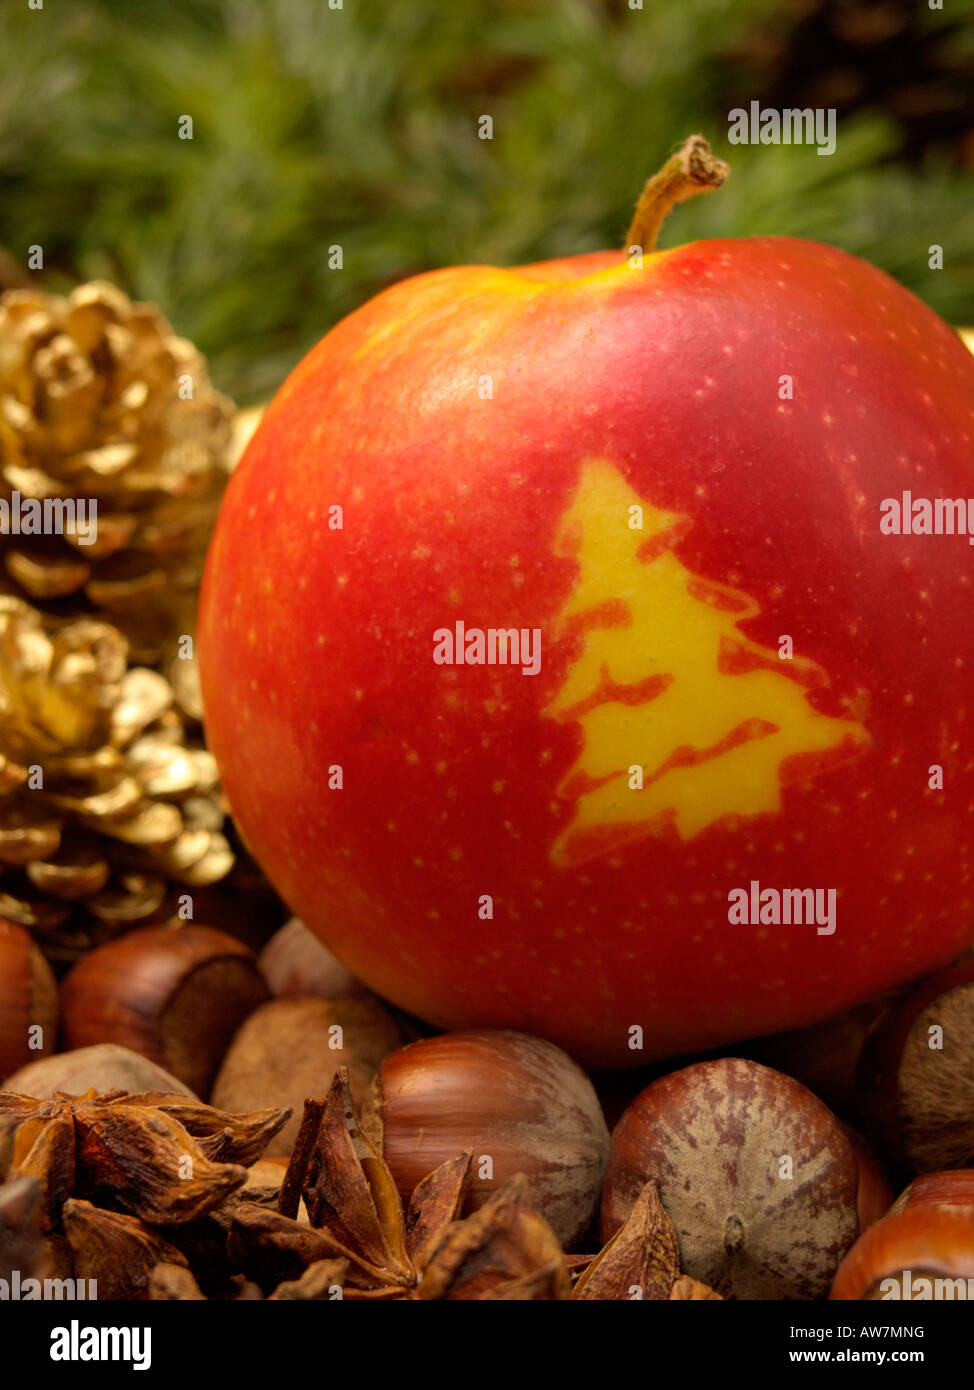 Orchard apple (Malus x domestica) with Christmas tree Stock Photo